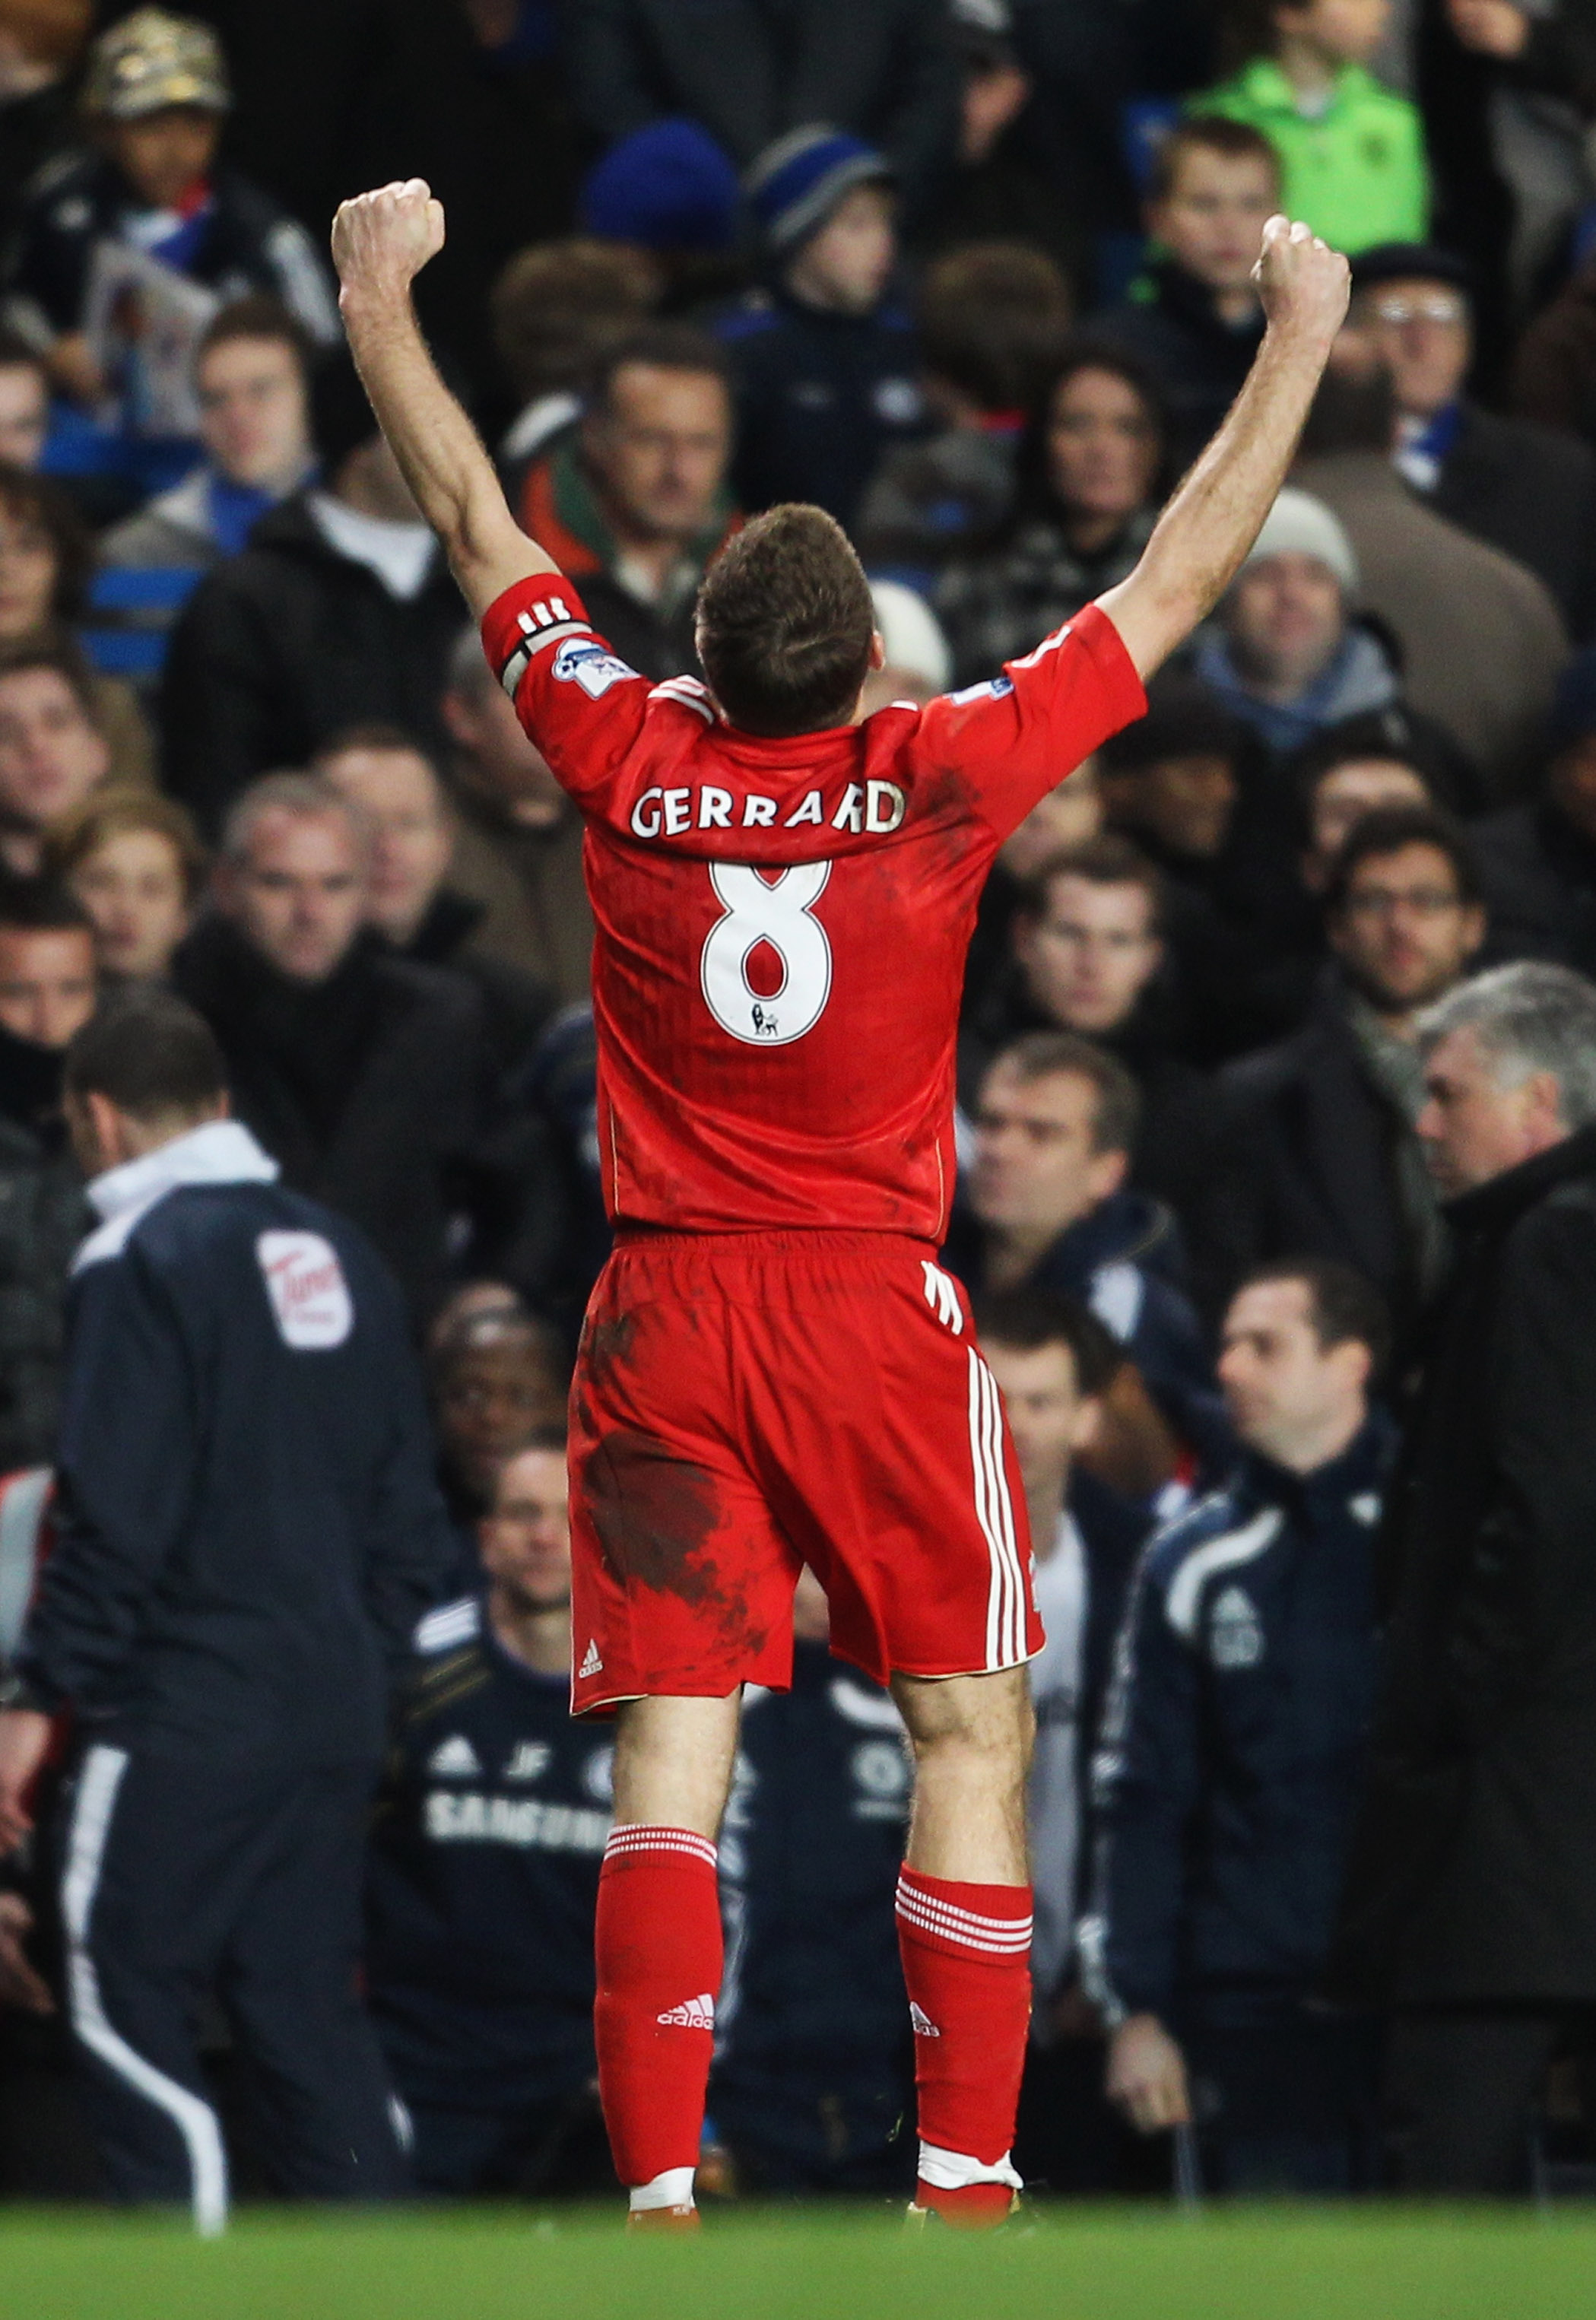 LONDON, ENGLAND - FEBRUARY 06:  Steven Gerrard of Liverpool  after the Barclays Premier League match between Chelsea and Liverpool at Stamford Bridge on February 6, 2011 in London, England.  (Photo by Scott Heavey/Getty Images)